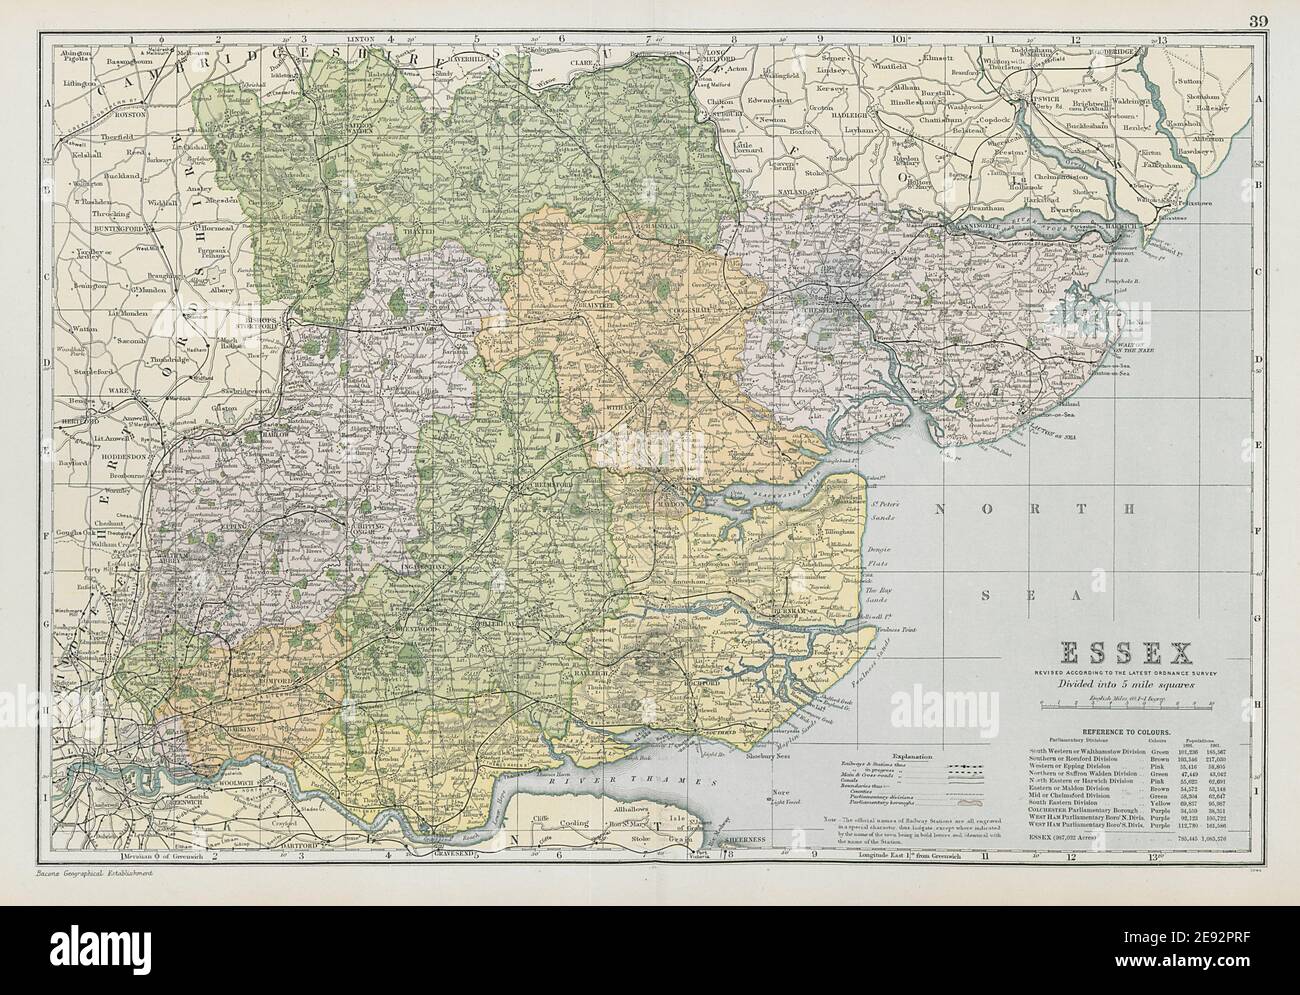 ESSEX county map. Parliamentary constituencies divisions. Railways. BACON 1906 Stock Photo